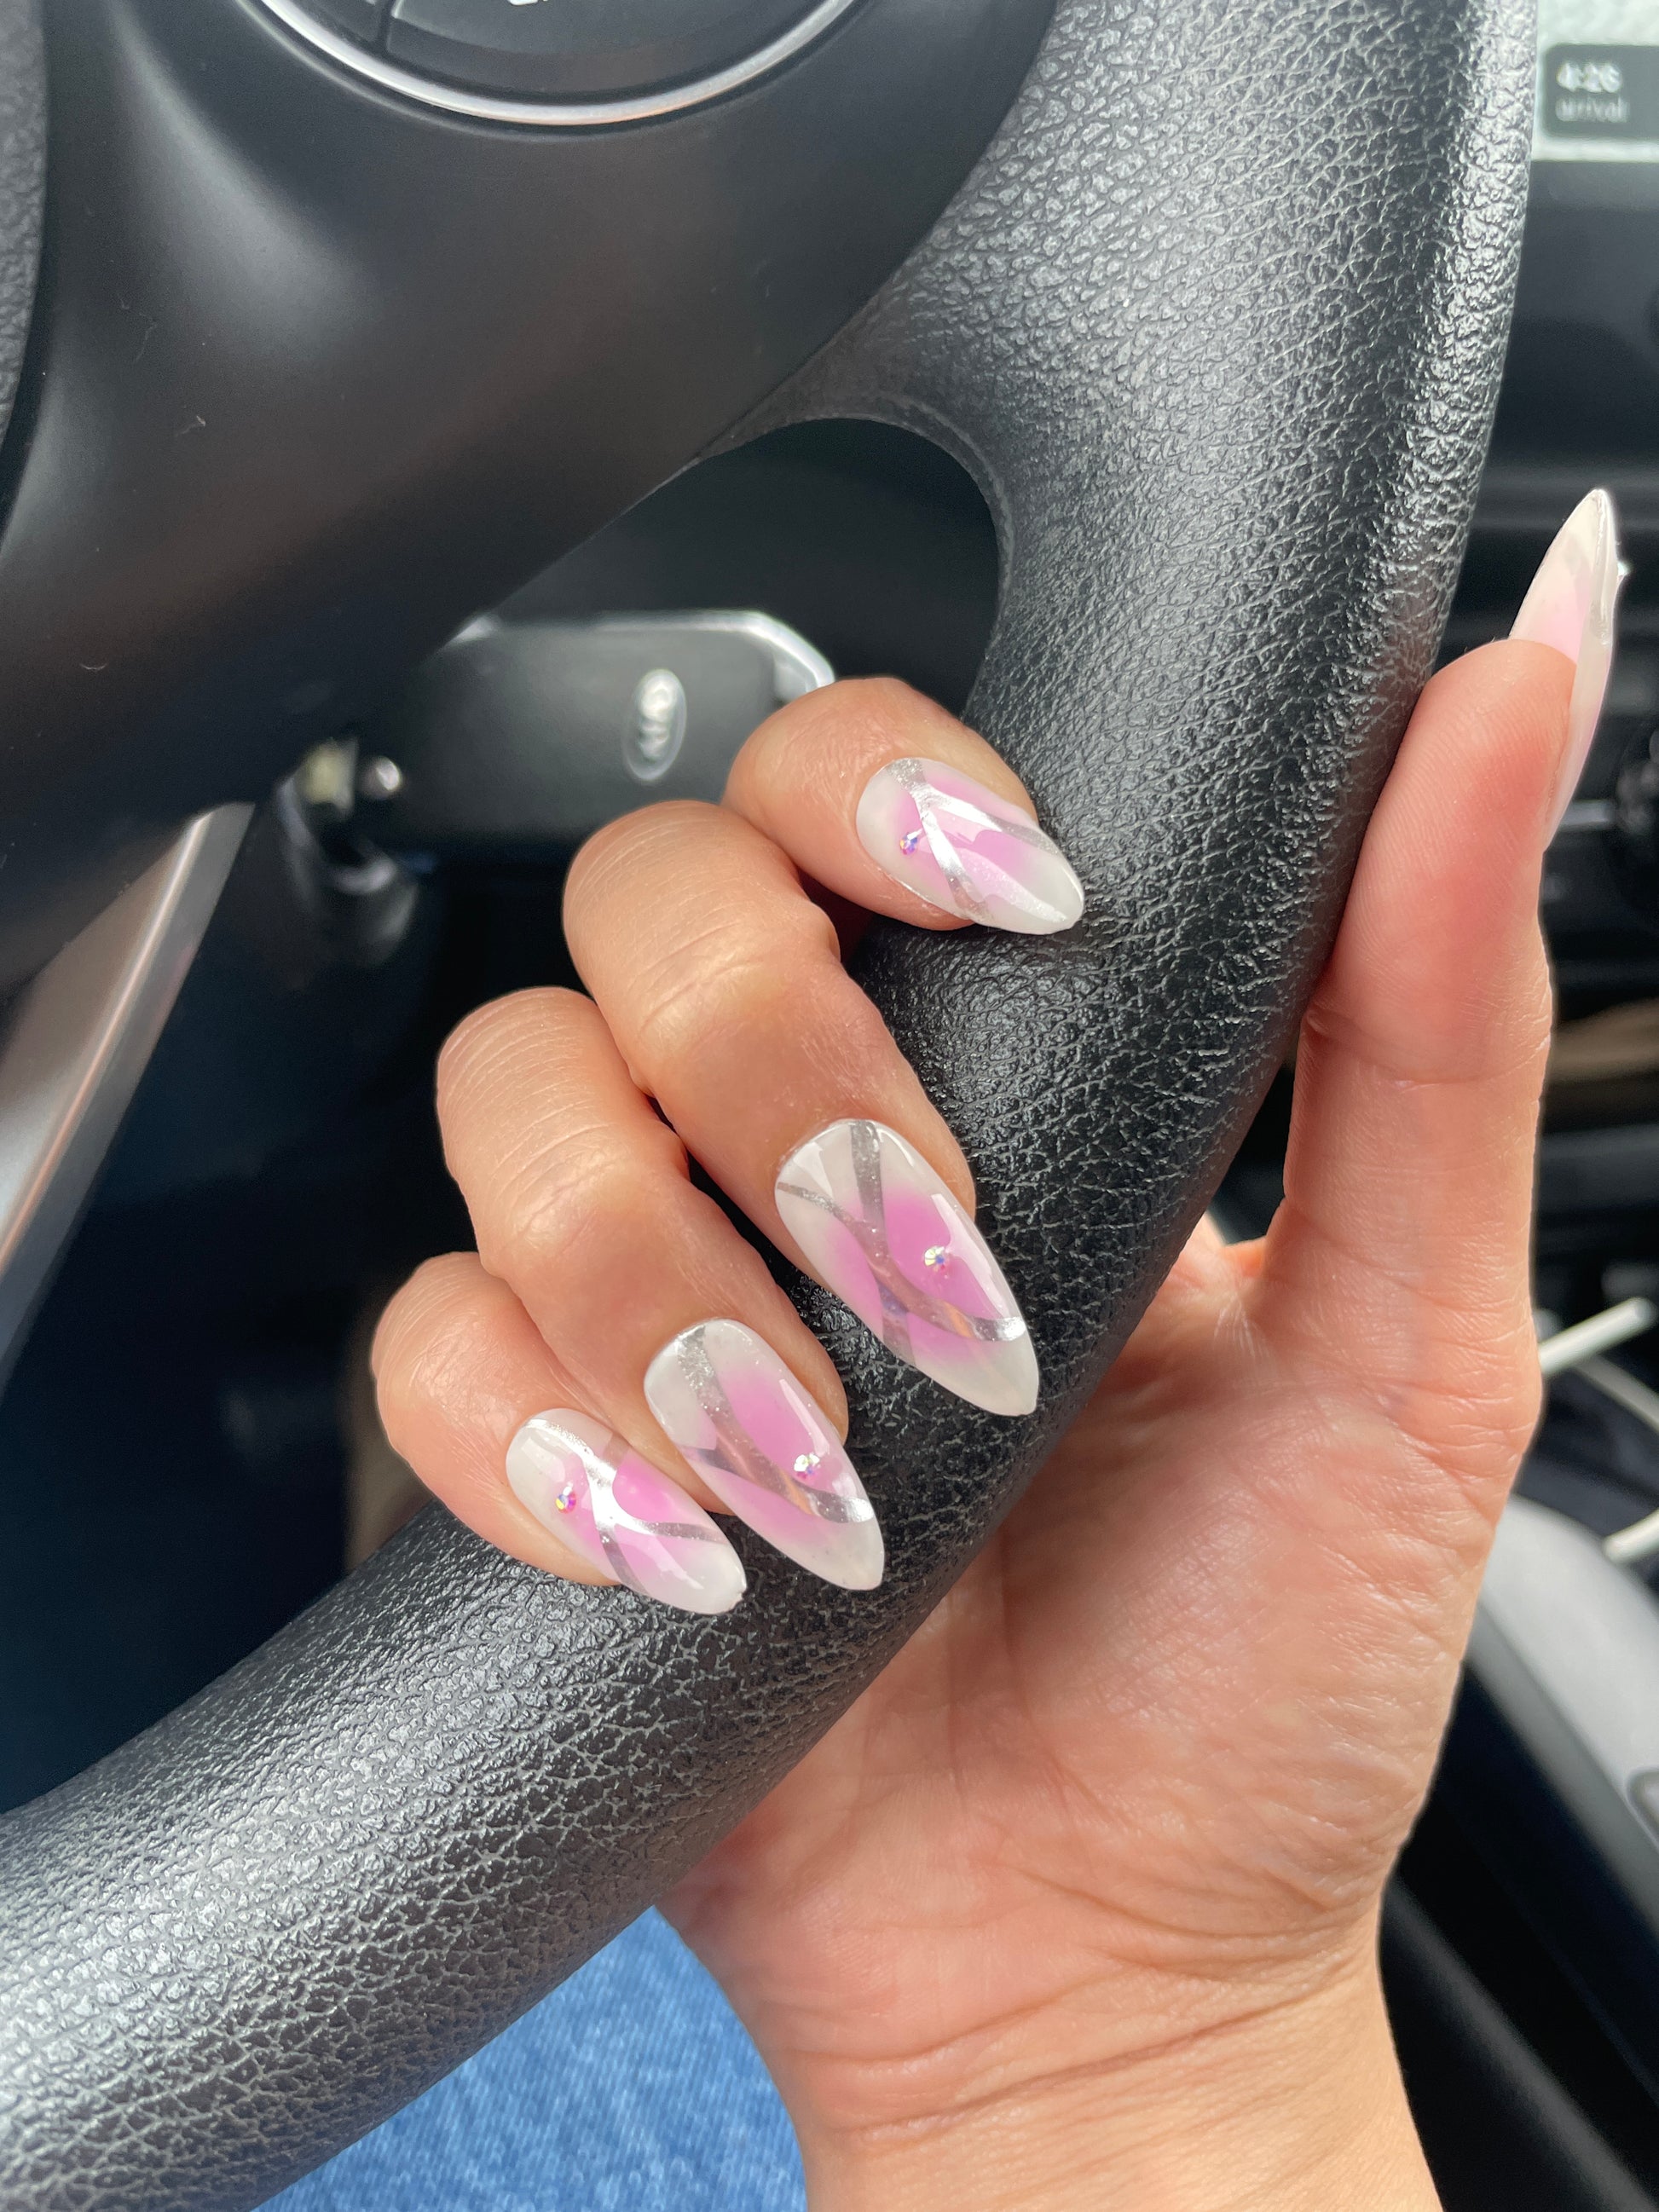 Airbrush Nail Art: This Throwback Trend Is Making A Comeback